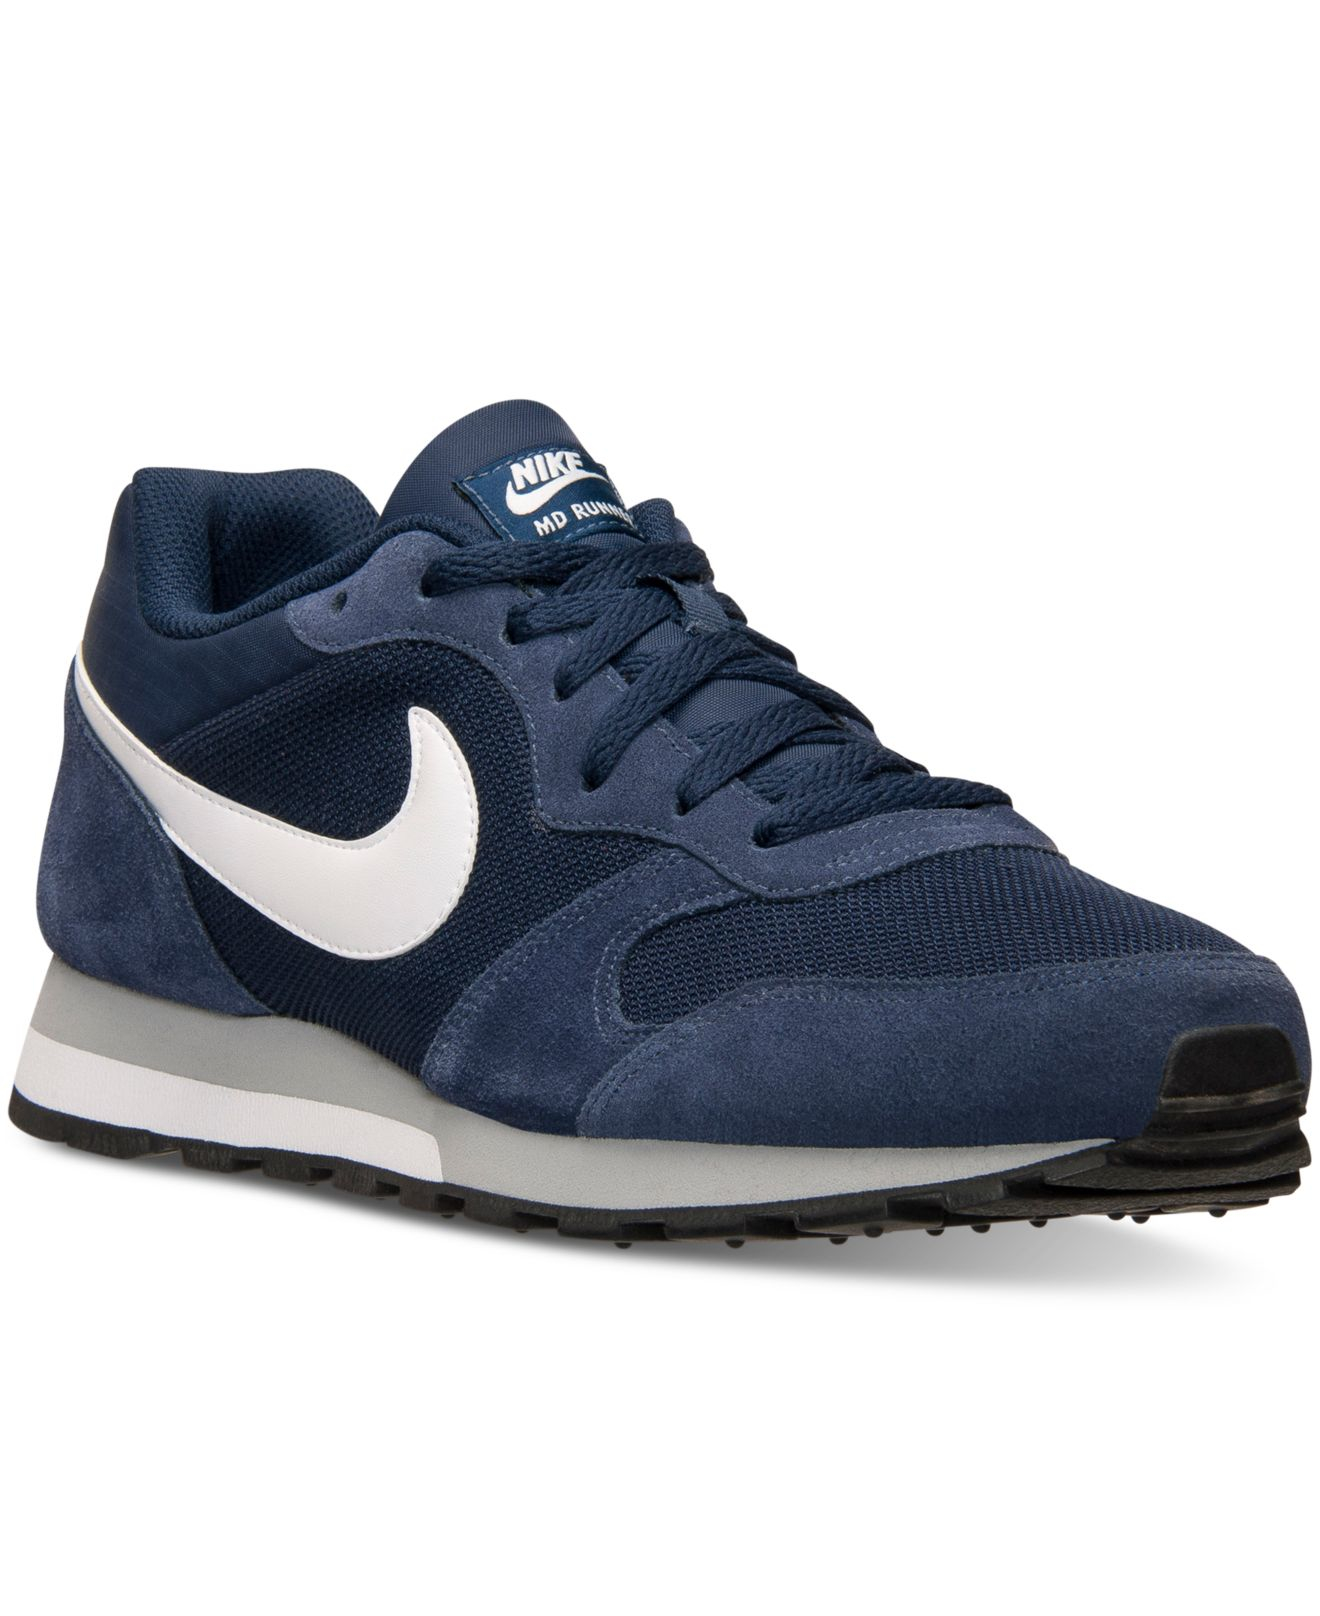 Lyst - Nike Men's Md Runner 2 Casual Sneakers From Finish Line in Blue ...